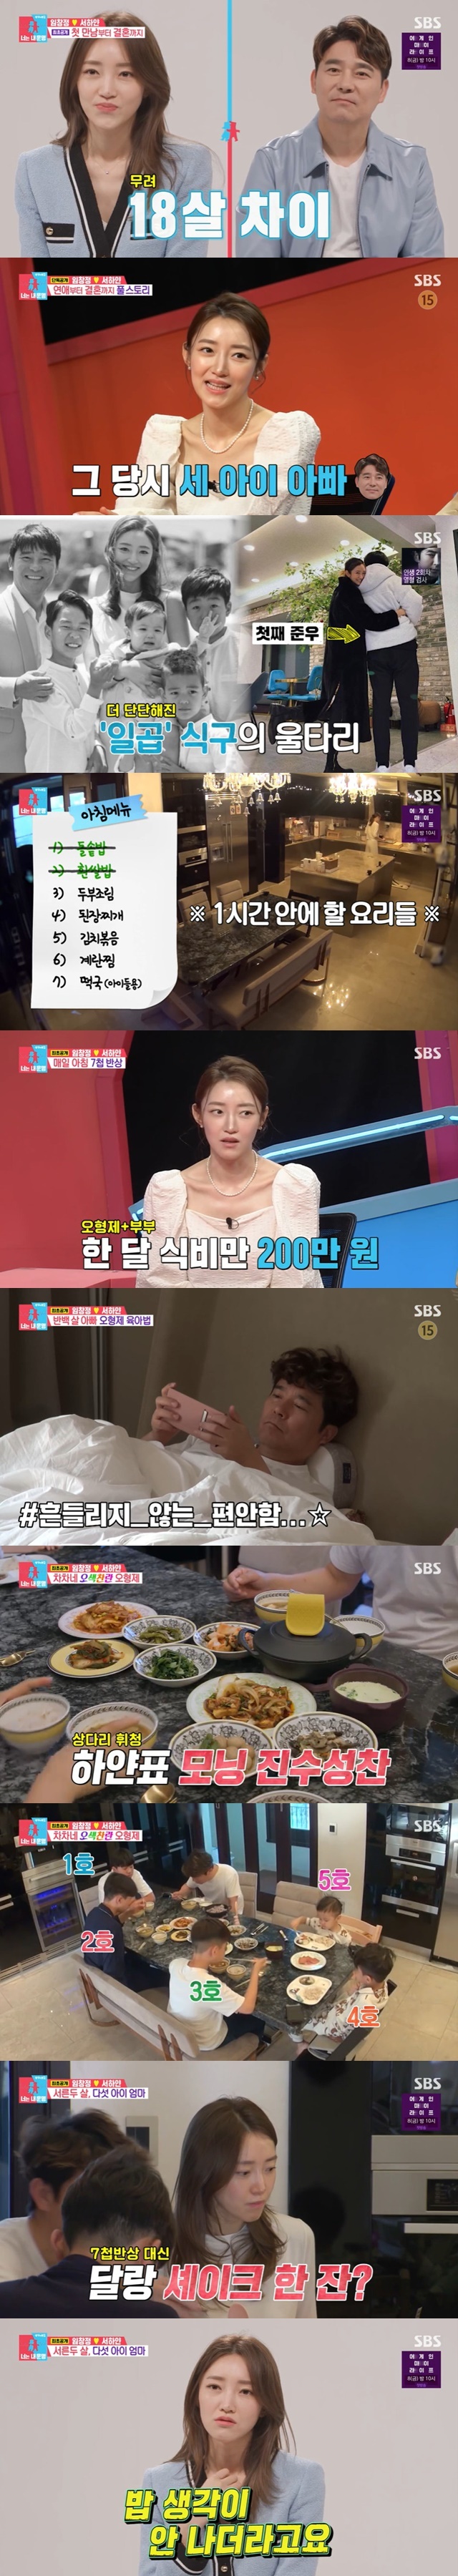 Im Chang-jungs 18-year-old wife, Seo Ha-yan, was pictured struggling morning.On SBSs Same Bed, Different Dreams 2 Season 2 - You Are My Destiny, which was broadcast on March 28, Im Chang-jung (50) Seo Ha-yan (32) and his wife joined.On this day, the marriage 6th year Im Chang-jung West White couple first appeared.Im Chang-jung remarried his 18-year-old wife, Seo Haiyan, with three sons, and had two more sons.Seo Haiyan said, We thought we should be okay, but Misunderstoods goal deepened and Misunderstood to show it as it is.The two first met eight years ago when West White came to the house of Im Chang-jung as a guest.At first sight, Im Chang-jung stored a phone sign for the service, and the meeting continued. Seo Haiyan later found out that Im Chang-jung had divorced with his three sons through search, and at first he felt a terrible feeling, but he was like Im Chang-jung.The daily life of the Im Chang-jung West White couple, which was released, began with the appearance of Im Chang-jung, who wakes up early in the morning and plays a game alone.Im Chang-jung woke up from 6:30 am and fell into a cell phone game. When the West White woke up, he said, Im Chang-jung is formal, Changjeong is formal.I always ate it. Changjeong is a regular dish of five side dishes favorite of Im Chang-jung, stir-fried fish cake, stir-fried kimchi, egg fried, and stewed.So, when Seo Haiyan started cooking Baro, and Kim Sook asked, Is it new in Moy Yat morning? Seo Haiyan replied, I rarely eat when I entered the refrigerator.Gahee was surprised that he was too shocked, and Park Sung-kwang was surprised that he was I tried to get it if I did not.Seo Haiyan added that the life of Im Chang-jung, who came home once a week or two when he lived in Jeju Island, is continuing in Ilsan.Im Chang-jung said, Im not really going to eat until today, Im going to lose weight, Im going to diet. But then, the way West White cooks is even more shocking.Seo white cooked two kinds of rice for children who like rice and Im Chang-jung who likes rice, and made various dishes at once from tofu, miso stew, kimchi stir-fried, egg steamed and rice cake soup.At the same time, a refrigerator used by seven families was released, and Seo Haiyan said, It costs 2 million won a month.If my brother and my brother call me once or twice a month, I will take a cow from Majang-dong and send it wholesale to the Baro freezer.They like meat the most, he explained.While West White was cooking alone, the youngest child, Lim Jun-pyo (4), woke his brothers to breakfast.Everyone from Lim Jun-woo (17), Lim Jun-sung (15), Lim Jun-ho (13) and Lim Jun-jae (6) sat on breakfast table and Im Chang-jung said, Miso soup is really delicious.The tofu is so delicious, she said, praising the West White dish for the best in the whole universe. Sons also said, Mother did it differently.The words have brought up my mouth, and my hard memories are gone, and I think Im starting again the next morning, West White said, but he didnt eat, he drank a shake.I dont think I can smell it while cooking, said West White, I feel hungry after I clean it up when I see them eating. Im not hungry and busy feeding my kids.The five sons were fed by their older siblings to serve as Fathers, and West Hayan thanked them for the brothers are very much Fathers. The preparations for their sisters attendance were also for their brothers.In the meantime, Im Chang-jung continued to play games in the room, and West White said, Sons are really good. They play Father. Even children do not play games.Father does the most, he said.After Seo Hee-yan asked for the tax revenue and brushing of Junjae and Junpyo, Im Chang-jung laughed as he could not even do it properly and wandered and buried his head with water.Nevertheless, Seo Hee-yan did not raise his voice once or get irritated, and surprised everyone with a steady calm appearance, saying, My tendency is not angry.The daily life of the Im Chang-jung West White couple, which was released on the day of the broadcast, is all about breakfast, preparing for childrens attendance and preparing for work.While Seo Ha-yan was struggling with a variety of dishes and taking care of his children, he only gamed and ate Im Chang-jung.In the following trailer, Im Chang-jung, a white couple, came to work together, revealing that West White is a working mother working together at Im Chang-jungs company.